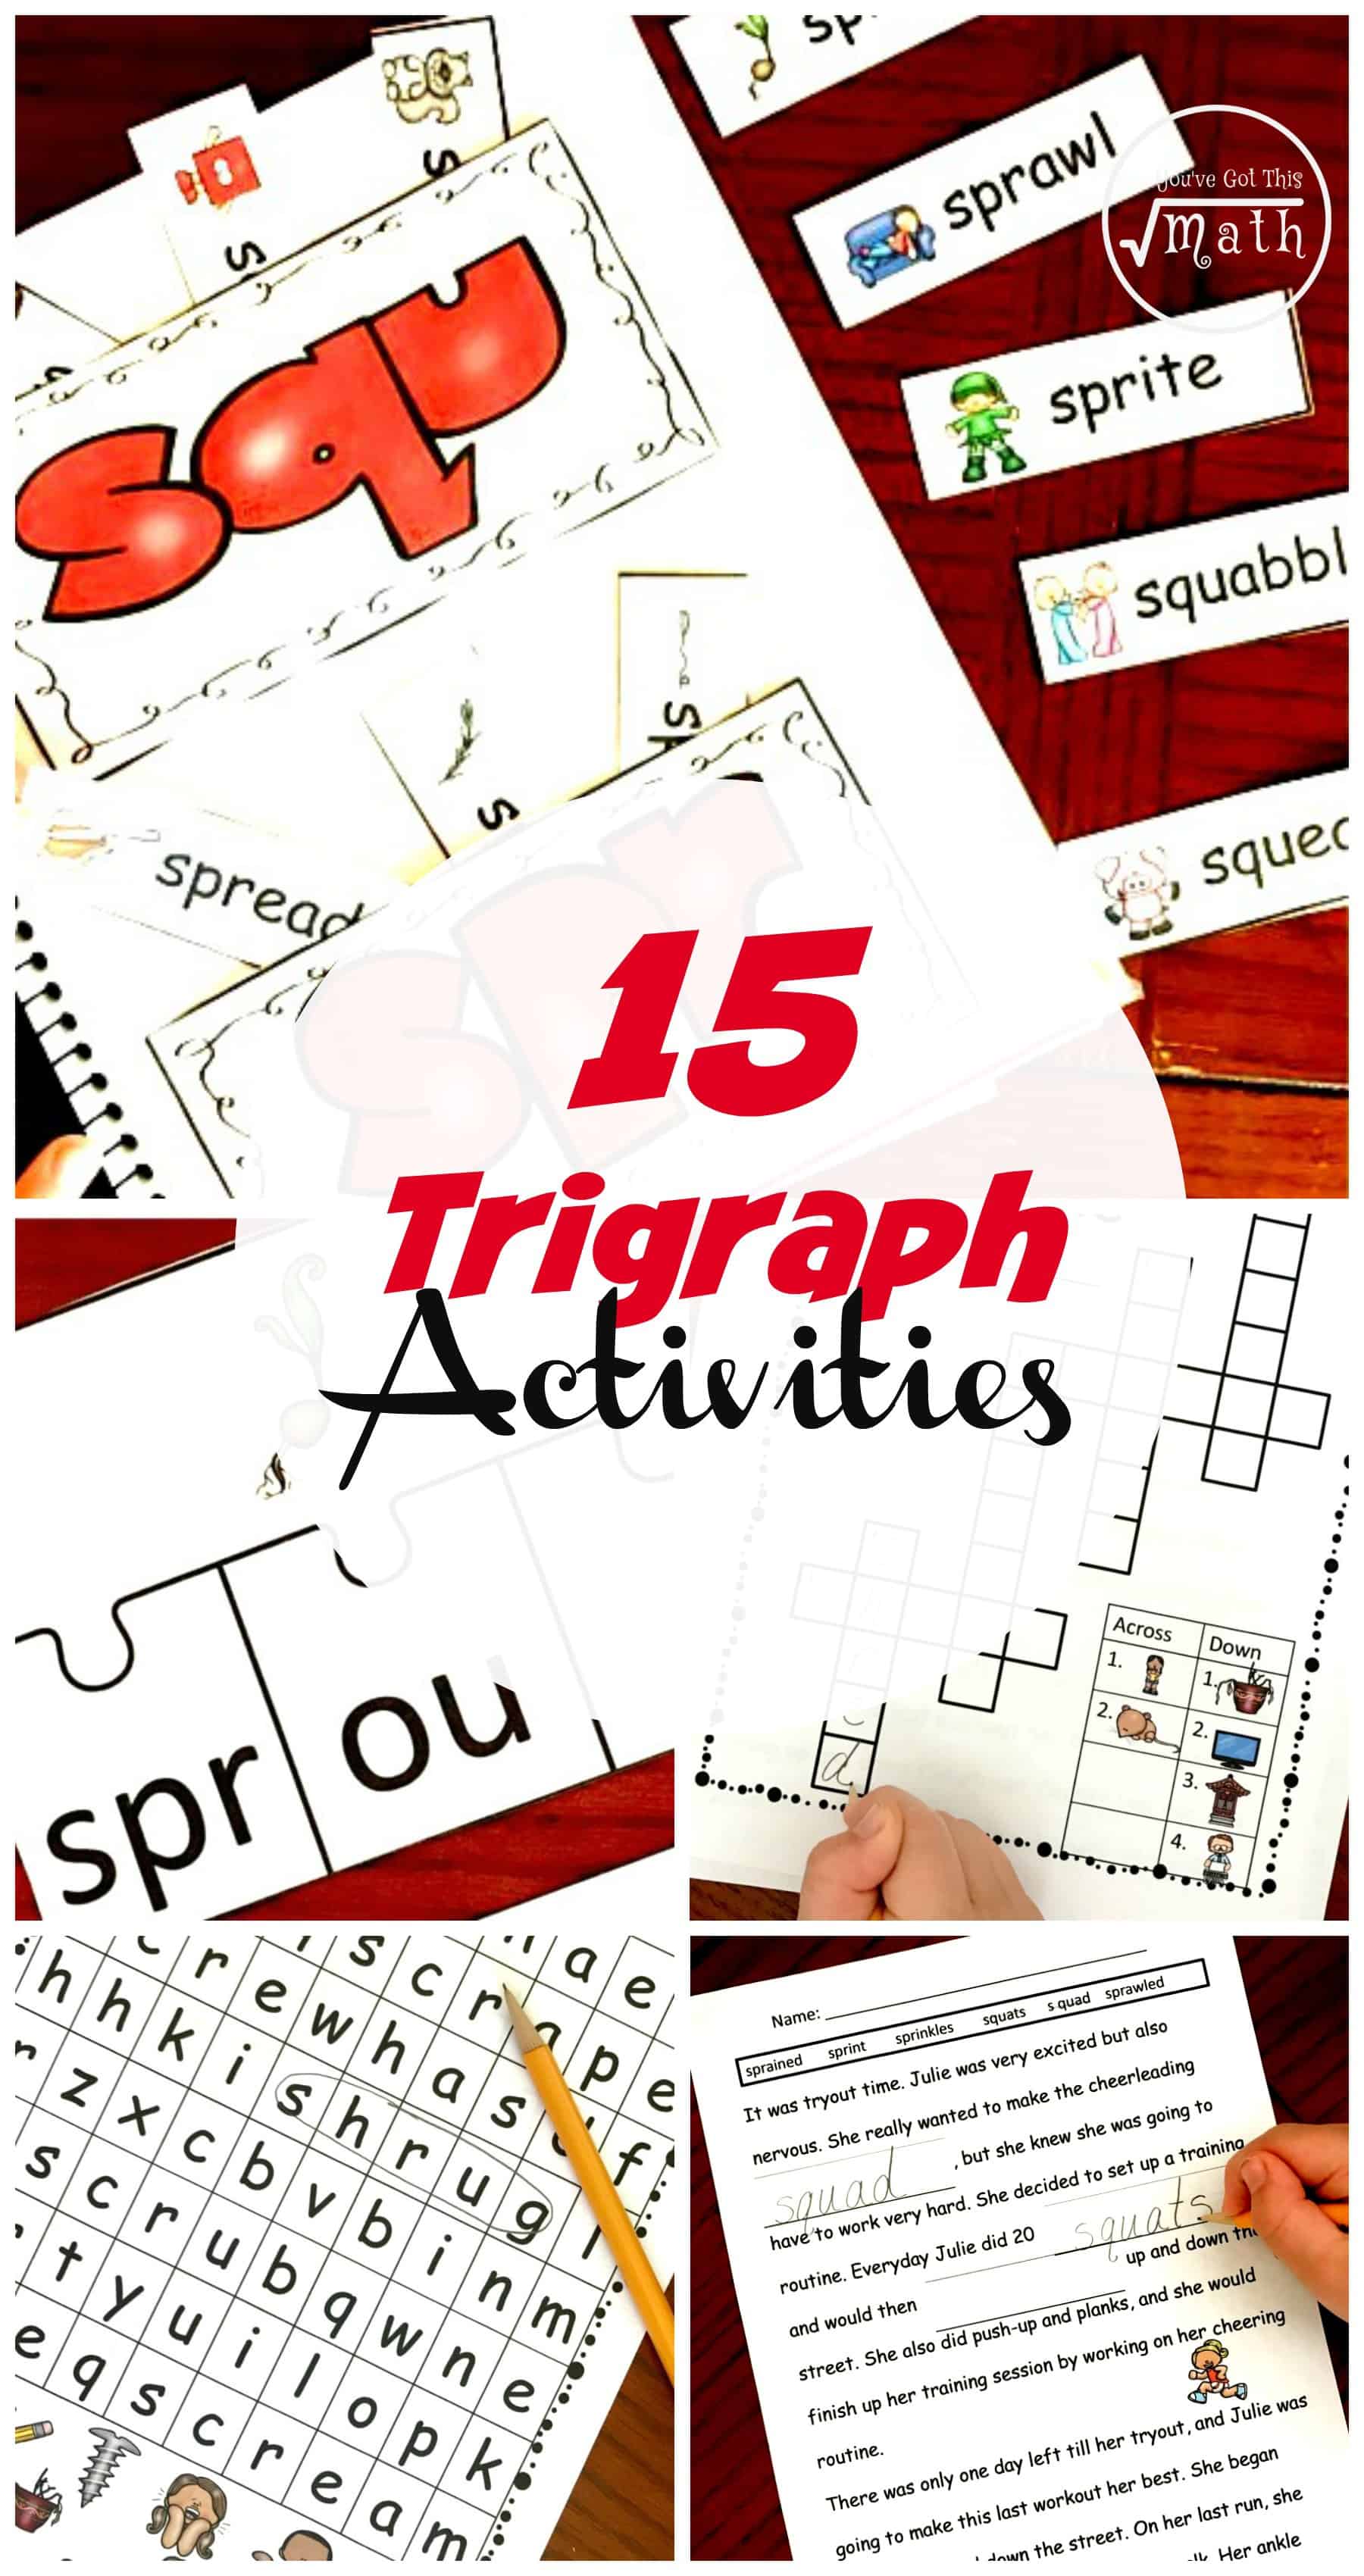 Ready to teach trigraphs? Check out these 15 hands-on and fun trigraph activities to help your students learn shr, scr, spr, sqr, str, and thr trigraphs or consonant clusters. 